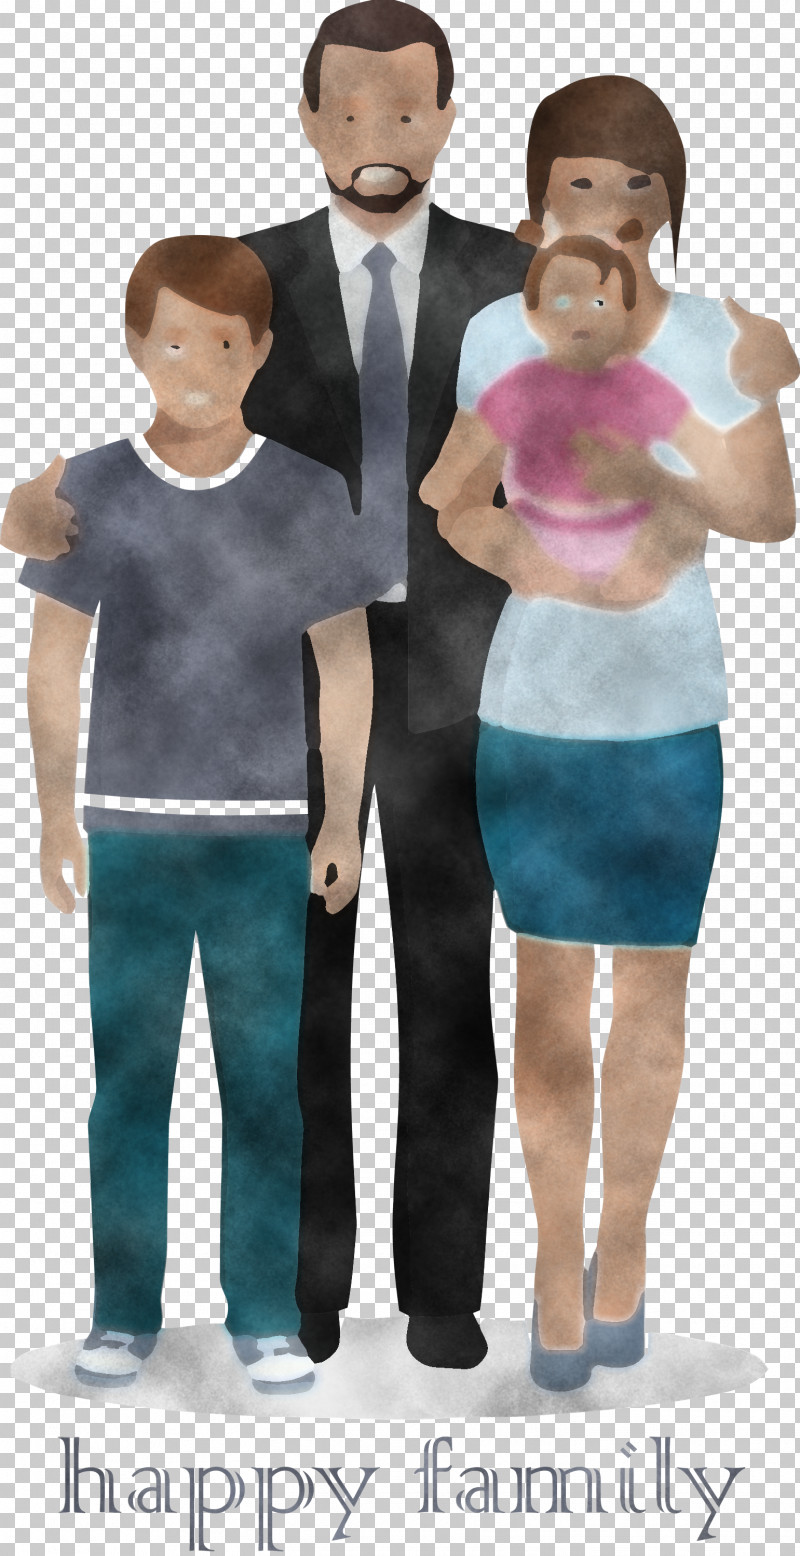 Family Day Happy Family Day Family PNG, Clipart, Child, Family, Family Day, Gesture, Happy Family Day Free PNG Download